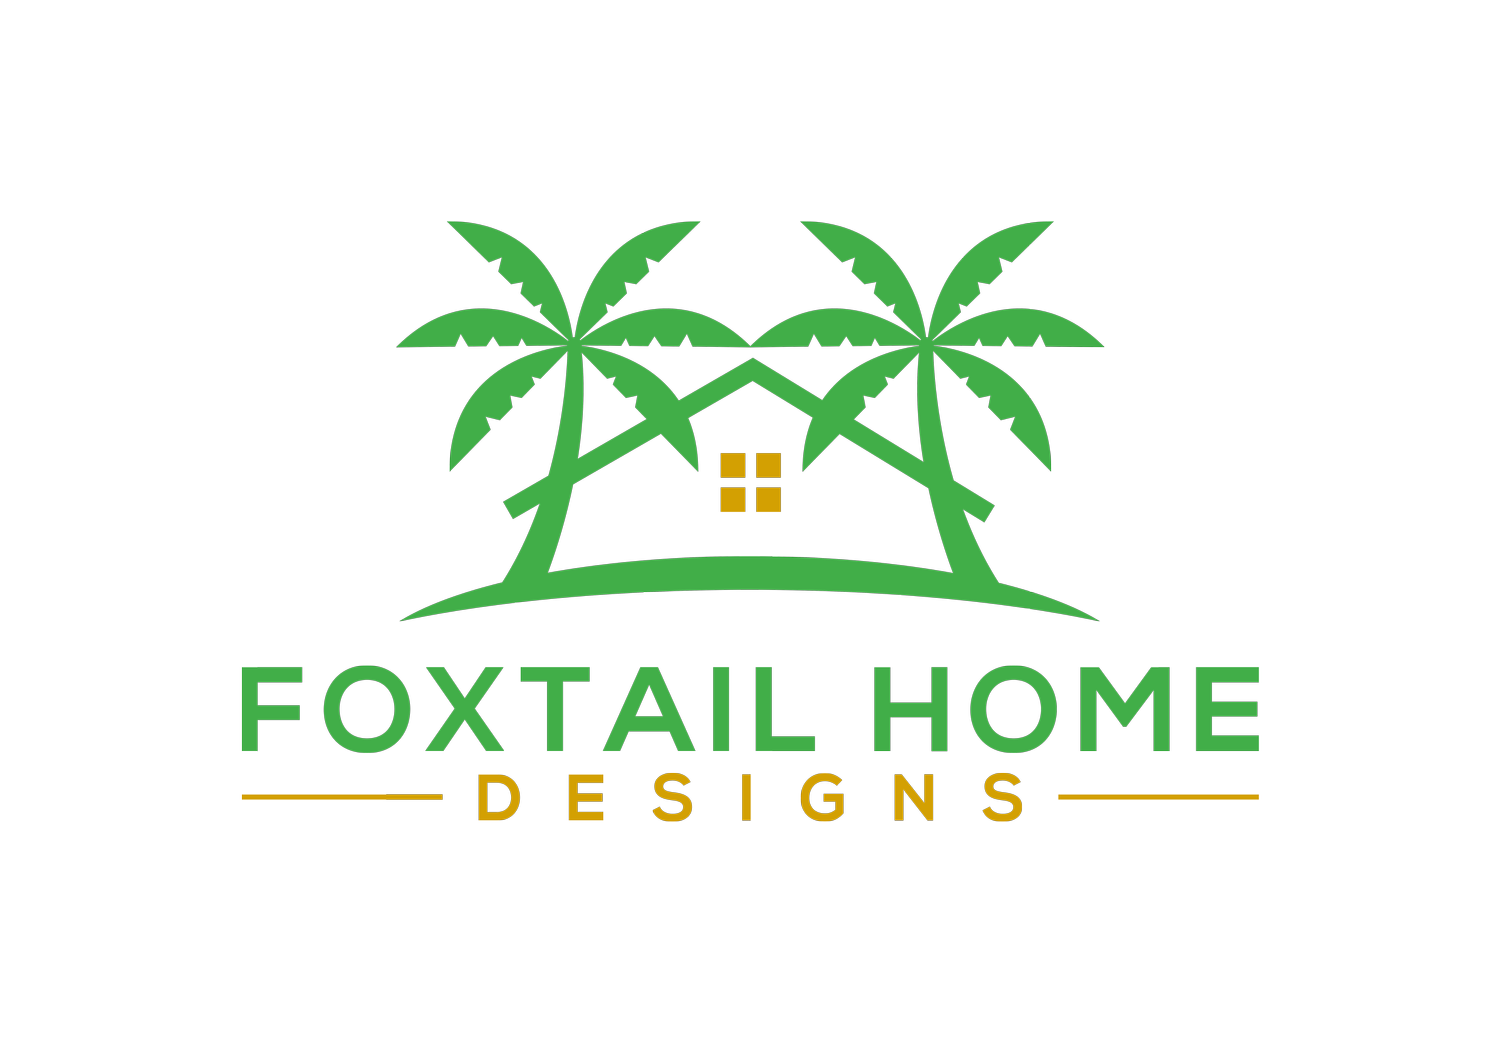 Foxtail Home Designs